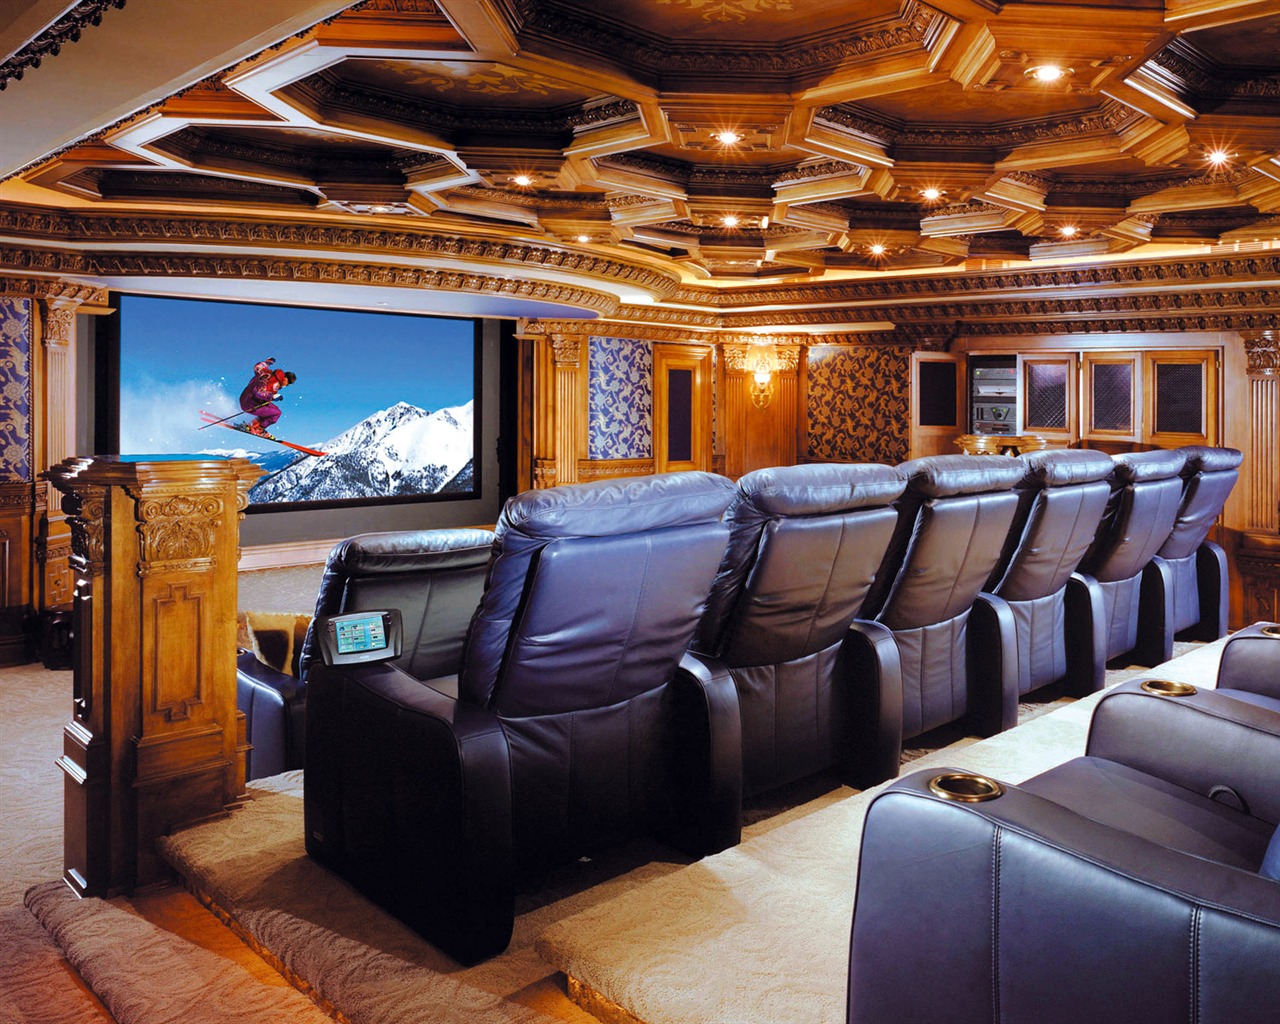 Home Theater wallpaper (2) #9 - 1280x1024